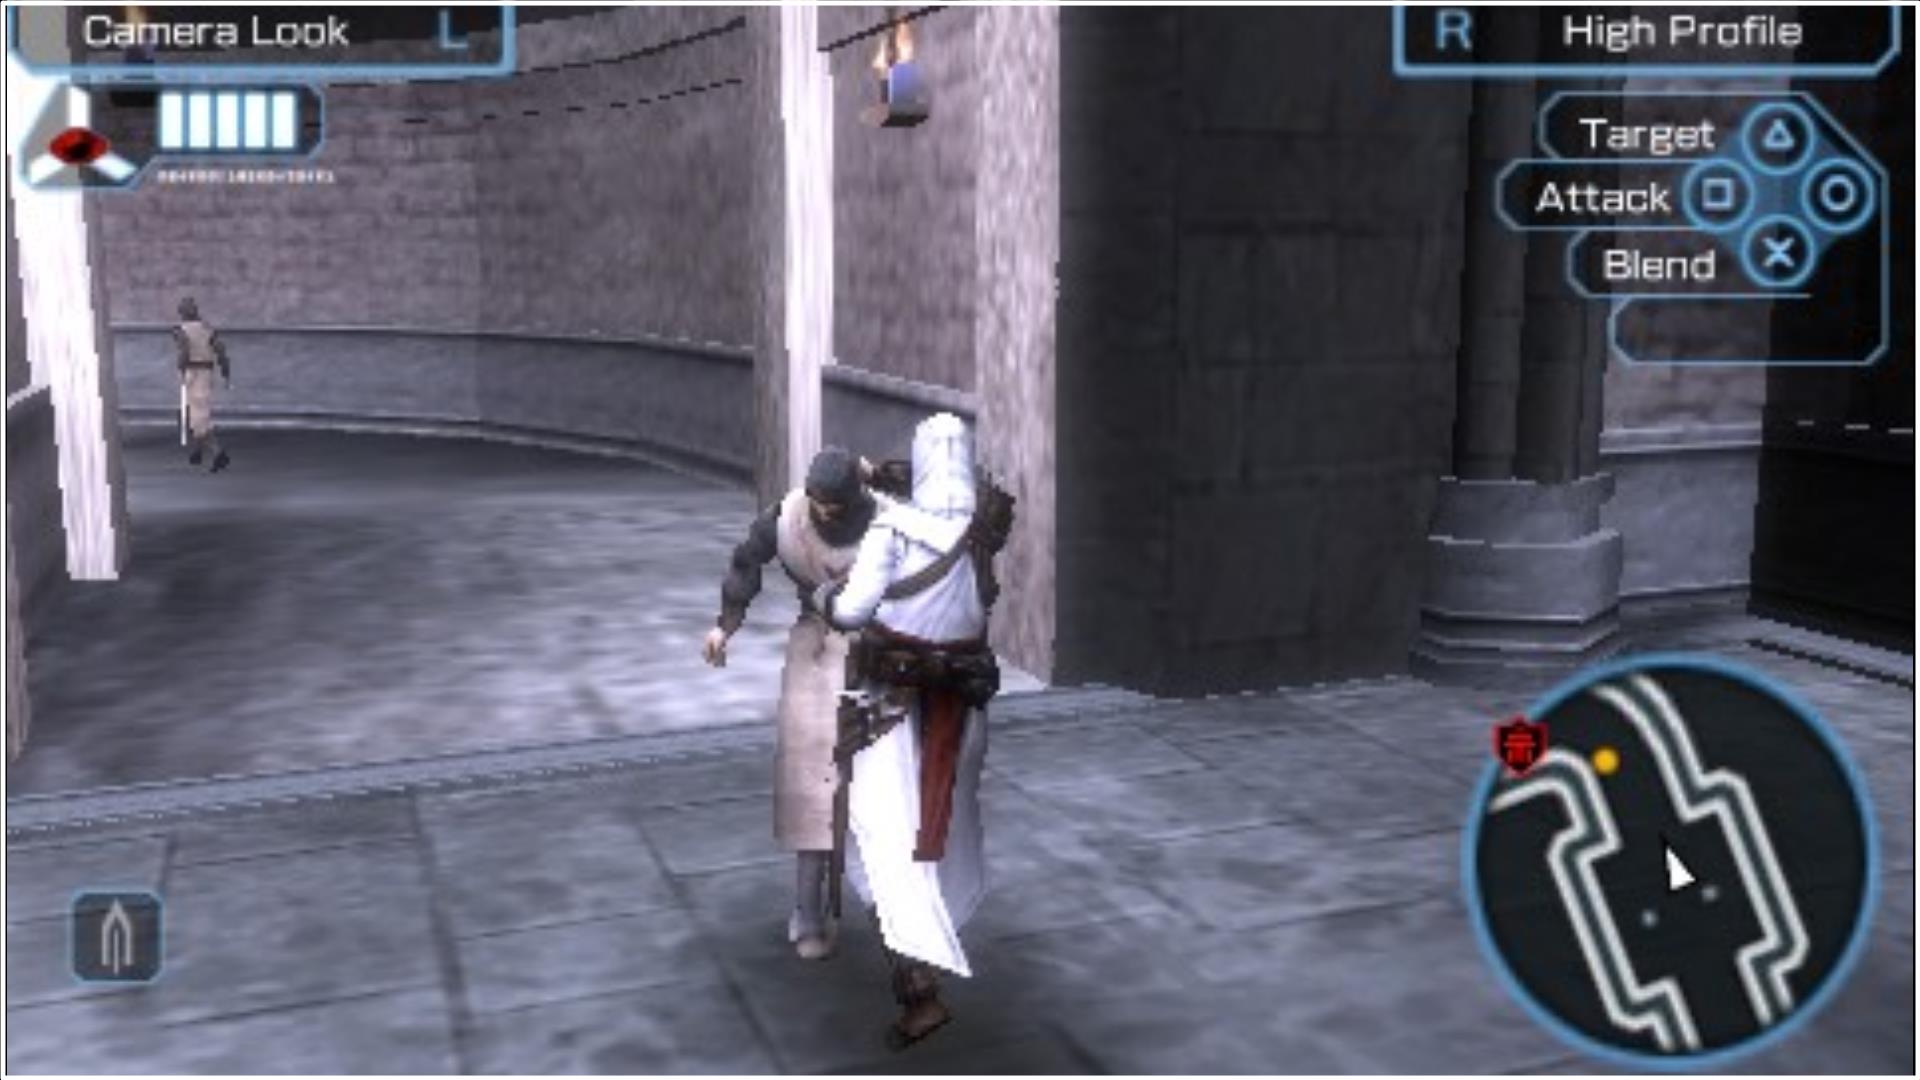 Download Assassin's Creed: Bloodlines✌✌🔥 *FILE INFO: (i) System : PSP (ii)  Best Emulator : PPSSPP (iii) File Size : 519 mb (compressed) *HOW TO PLAY?  (i) Install Emulator and download file. (ii)